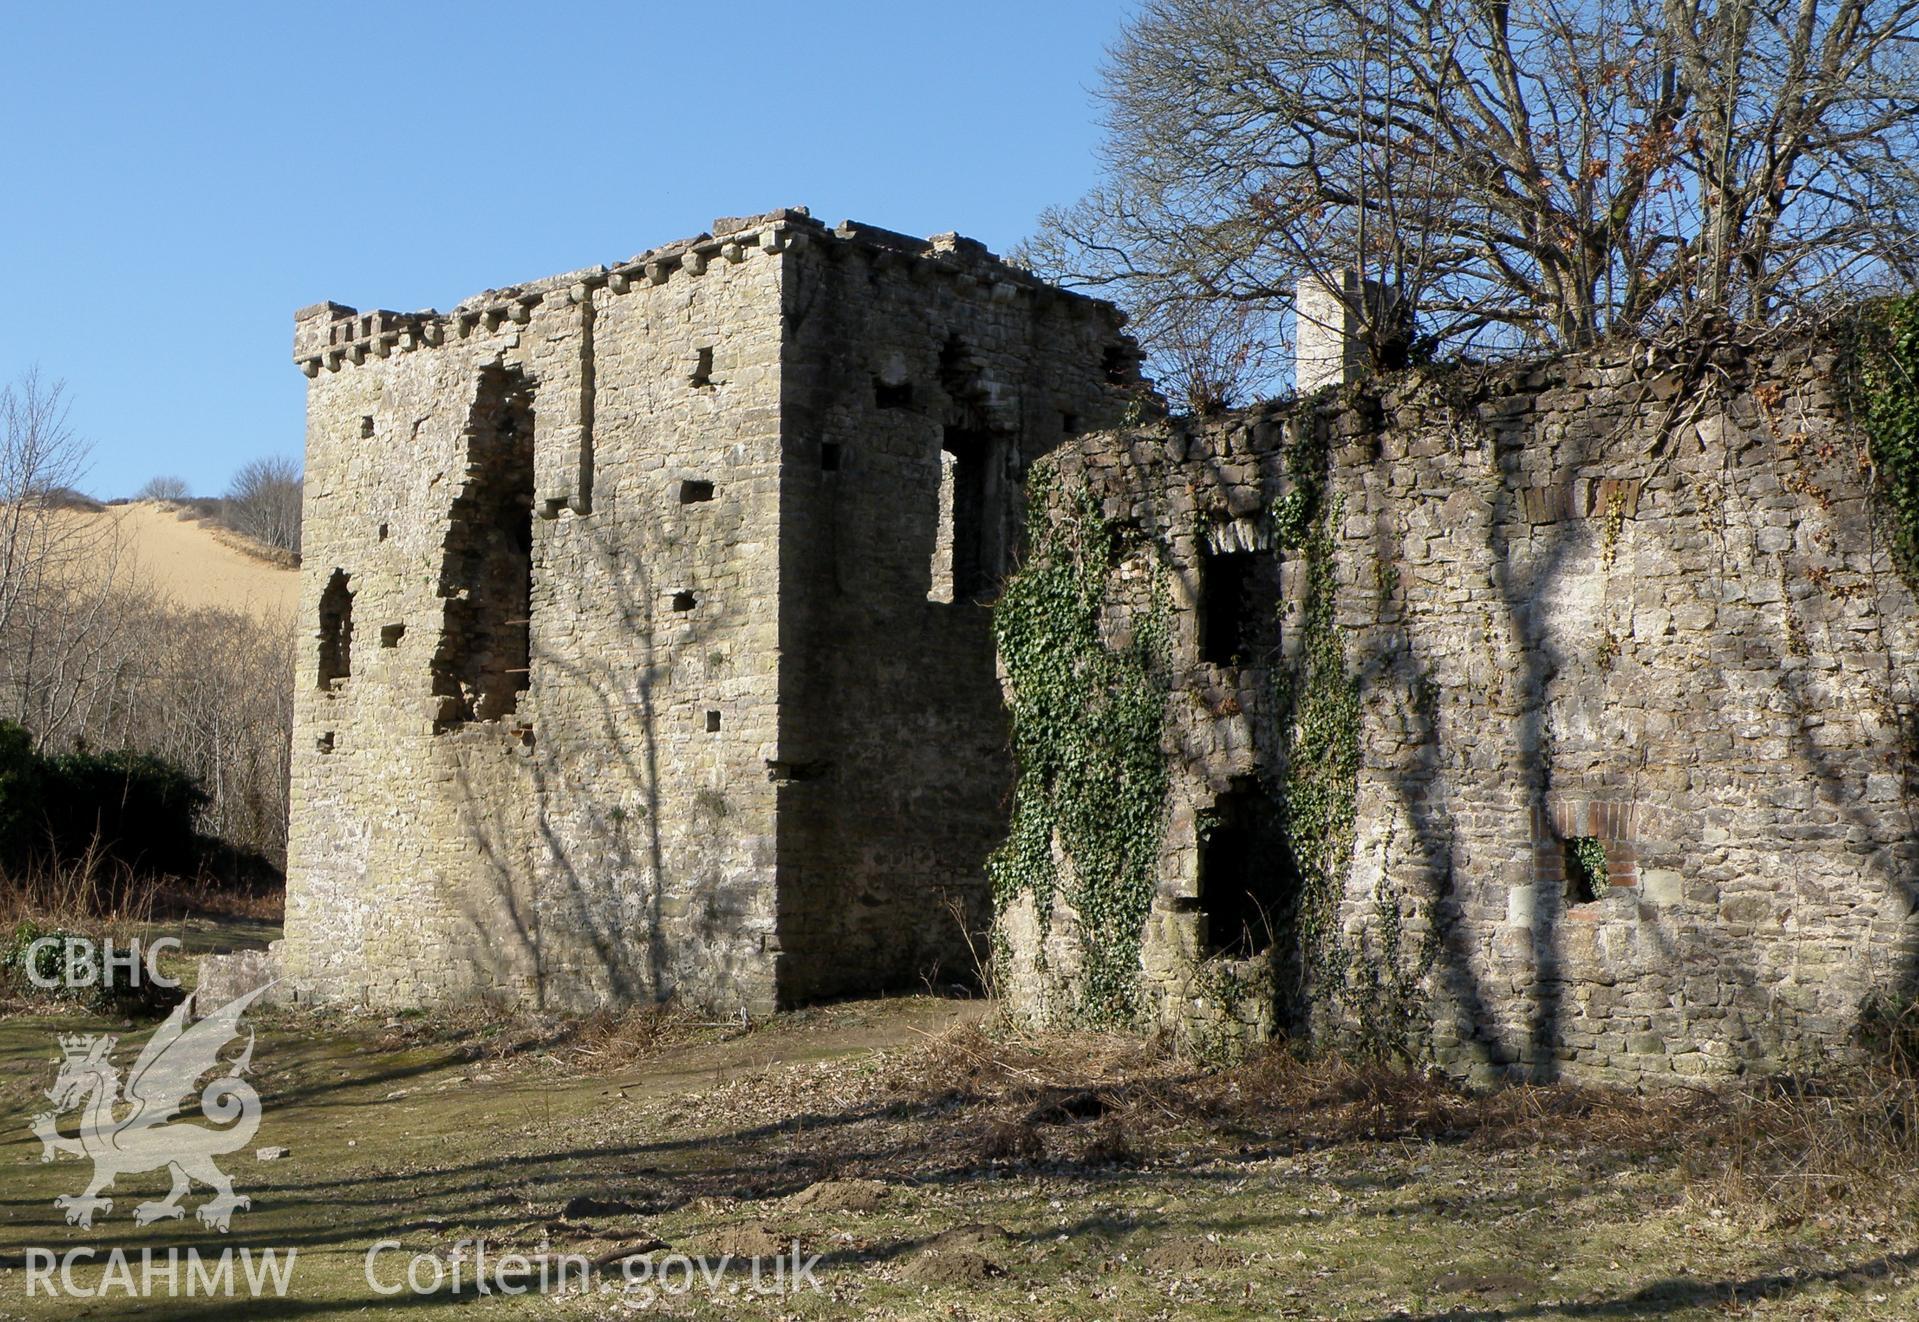 Colour photo showing Candleston Castle, produced by  Paul R. Davis,  7th March 2010.